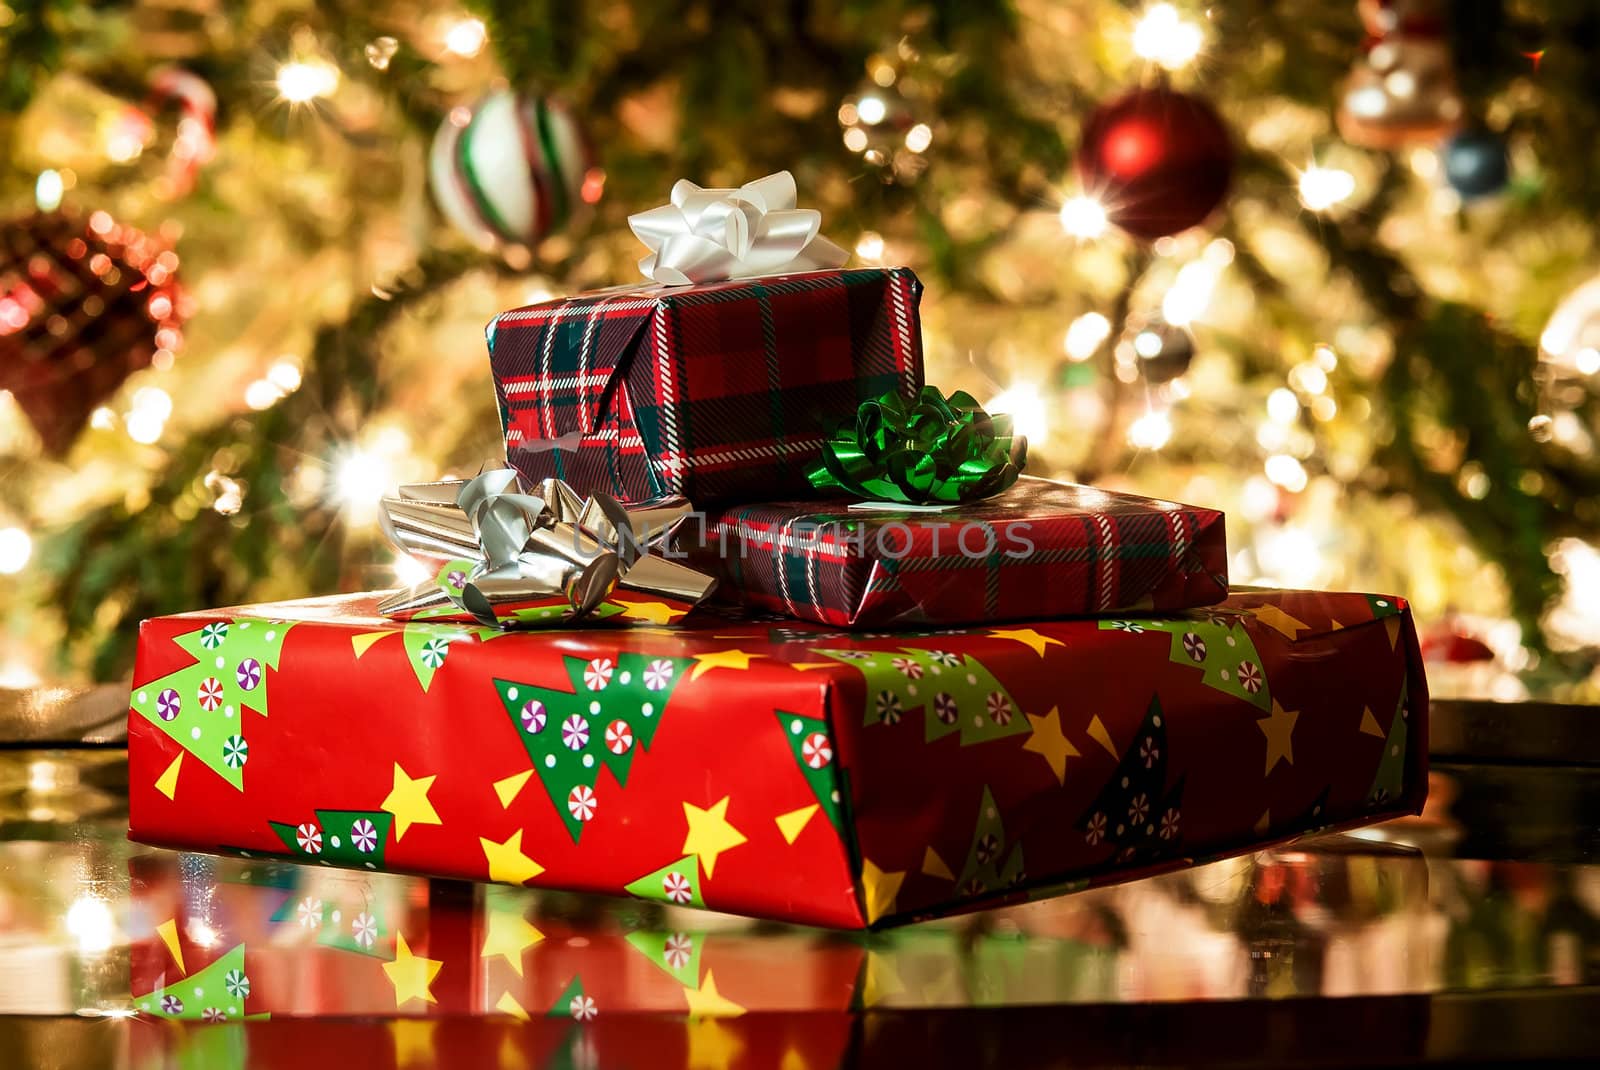 Image of presents and gifts by digidreamgrafix